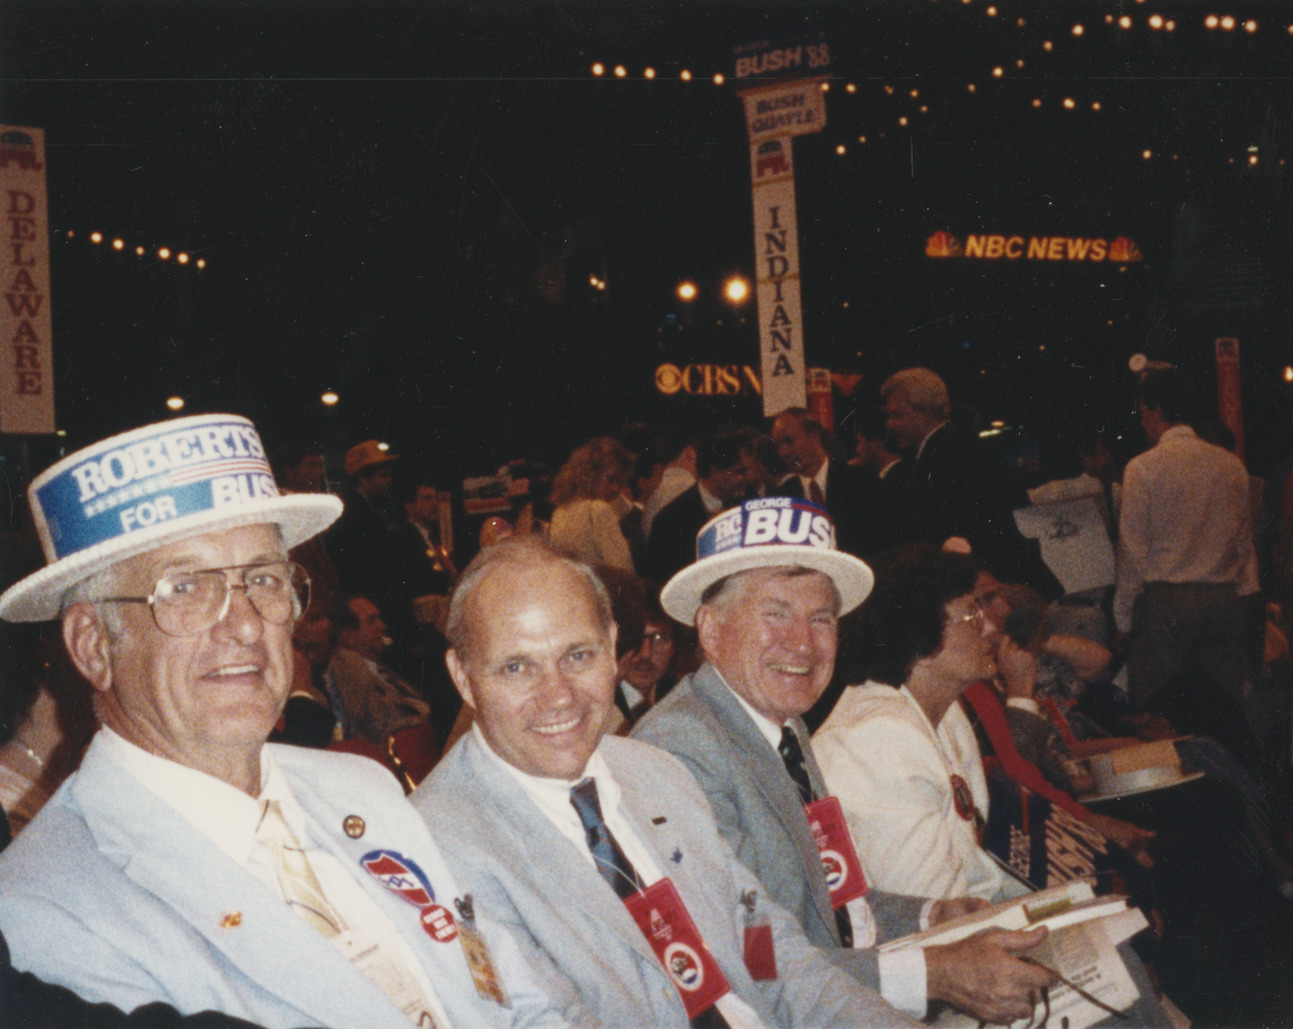 A photo of Benjamin Gettler wearing a hat showing supporting Bush at the 1984 Republican National Convention